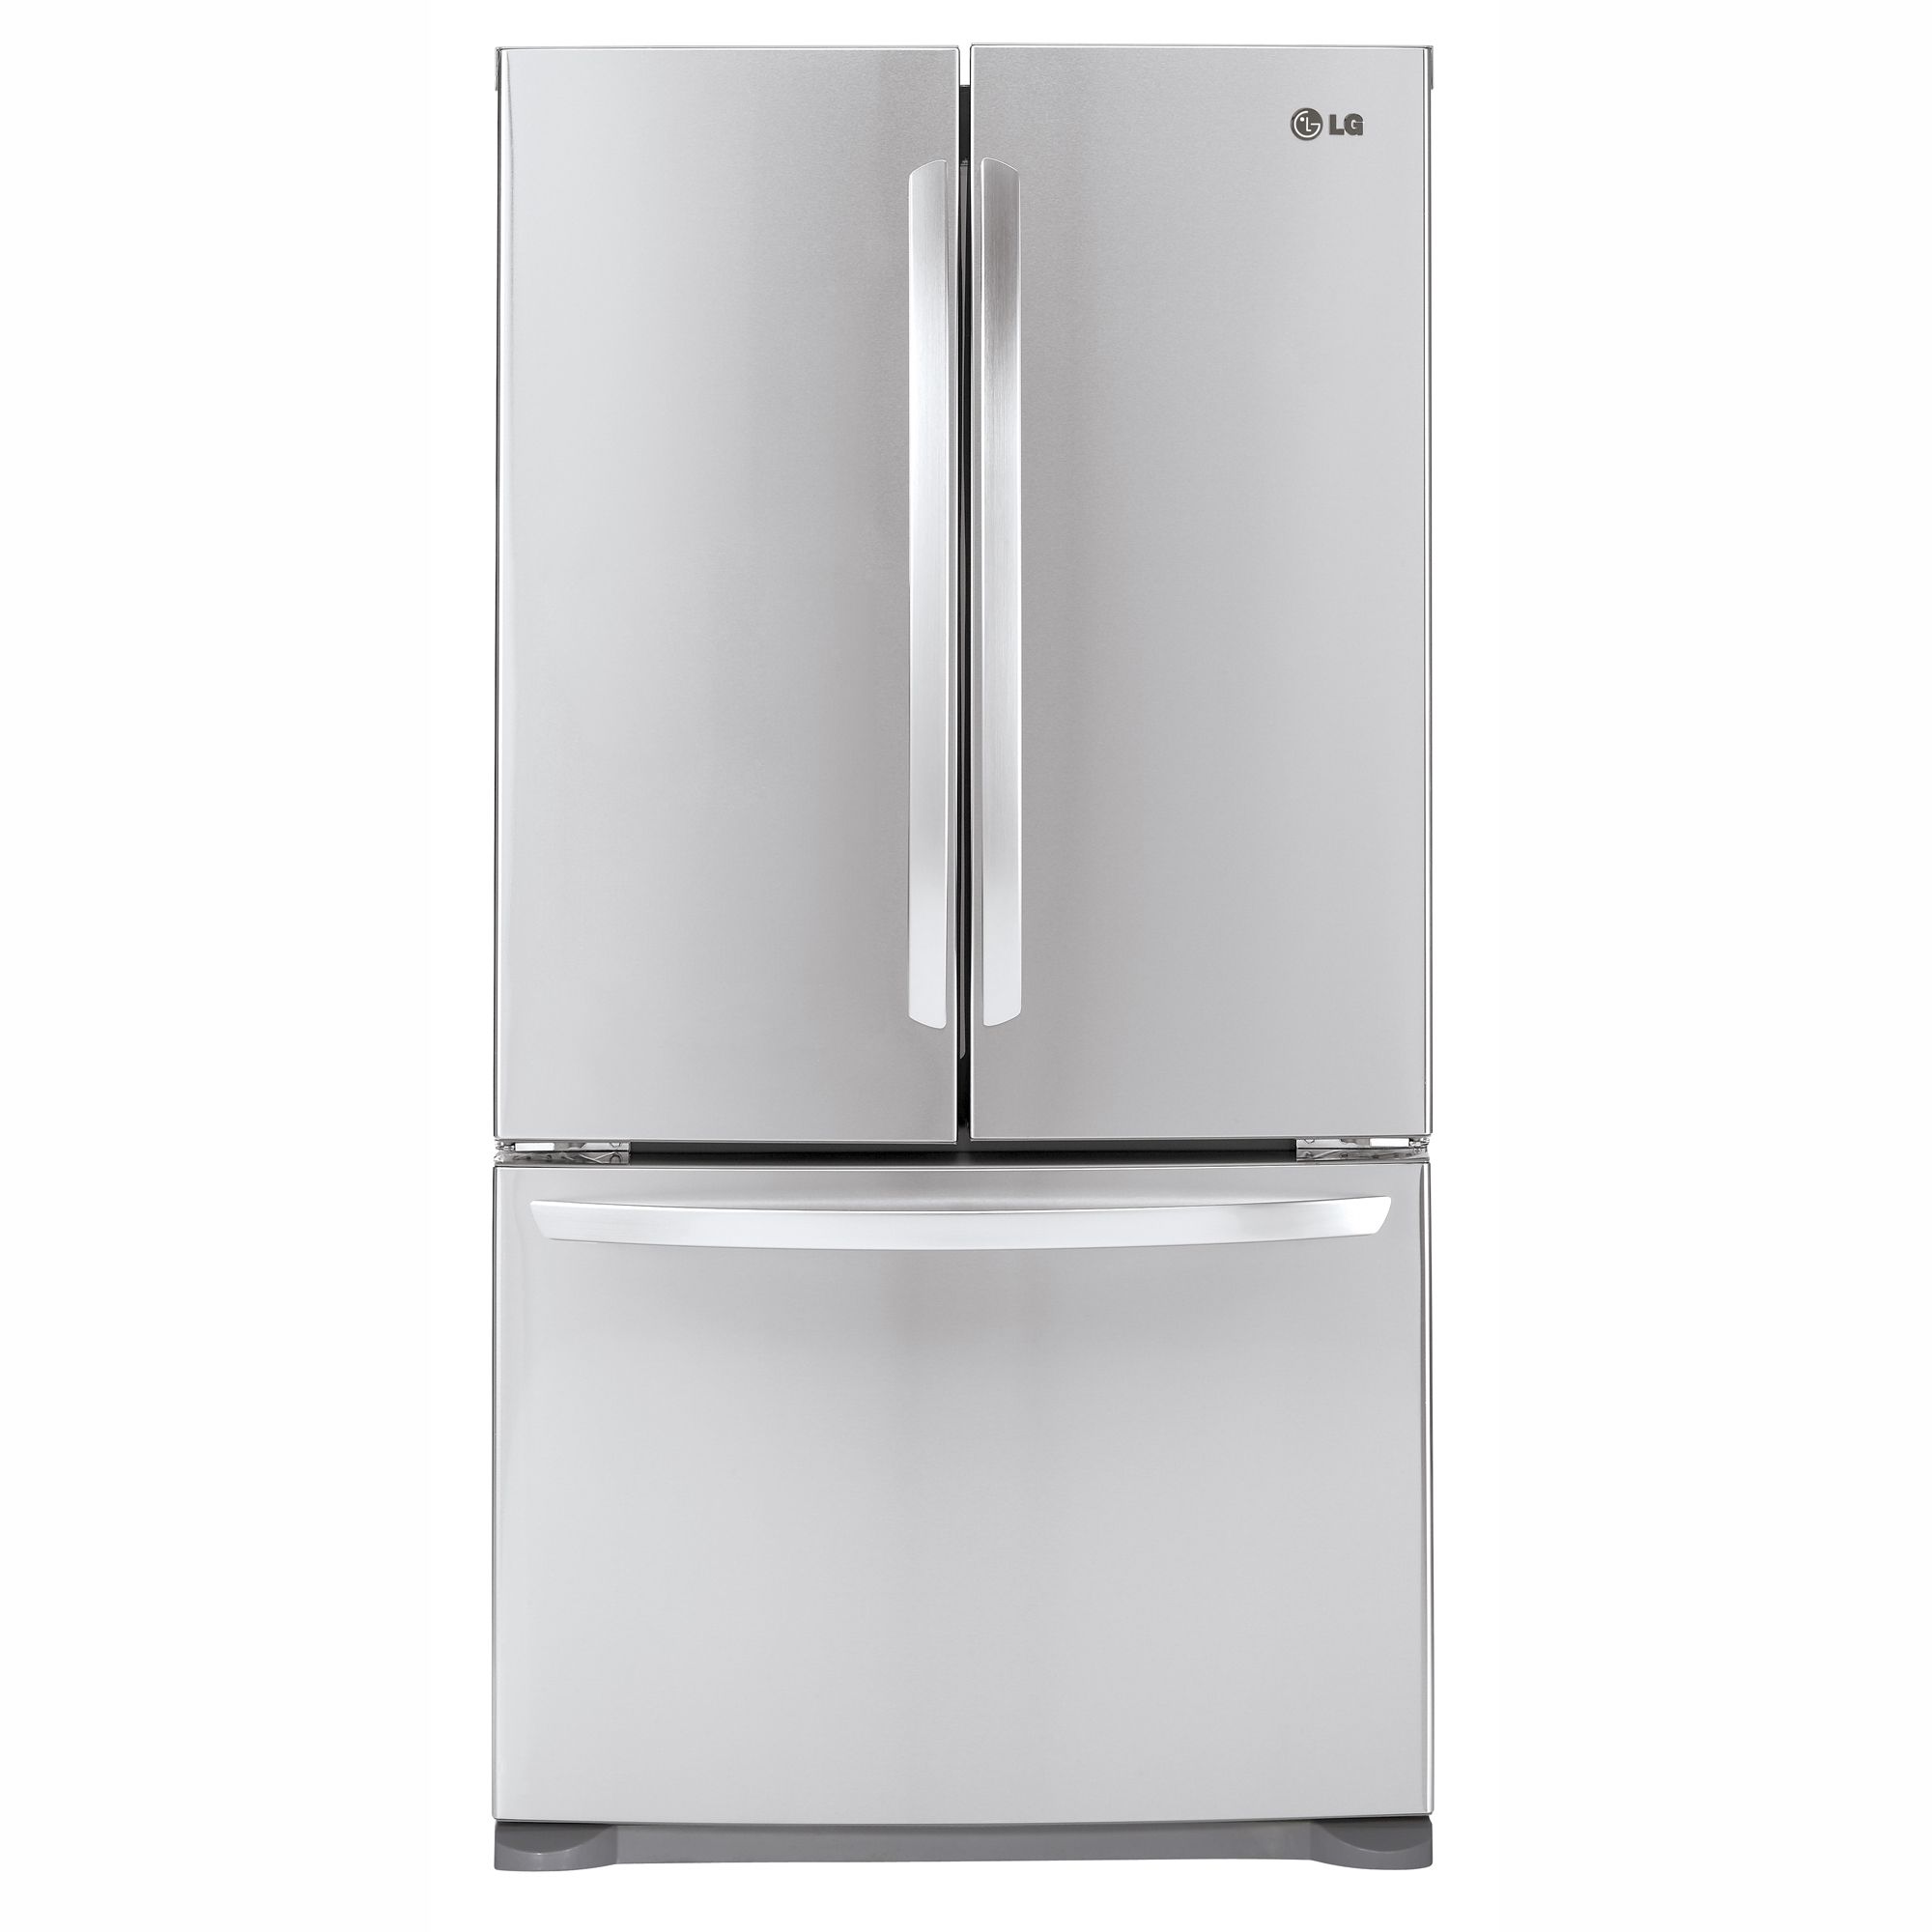 LG LFC21776ST 21 cu. ft. French Door Refrigerator Stainless Steel